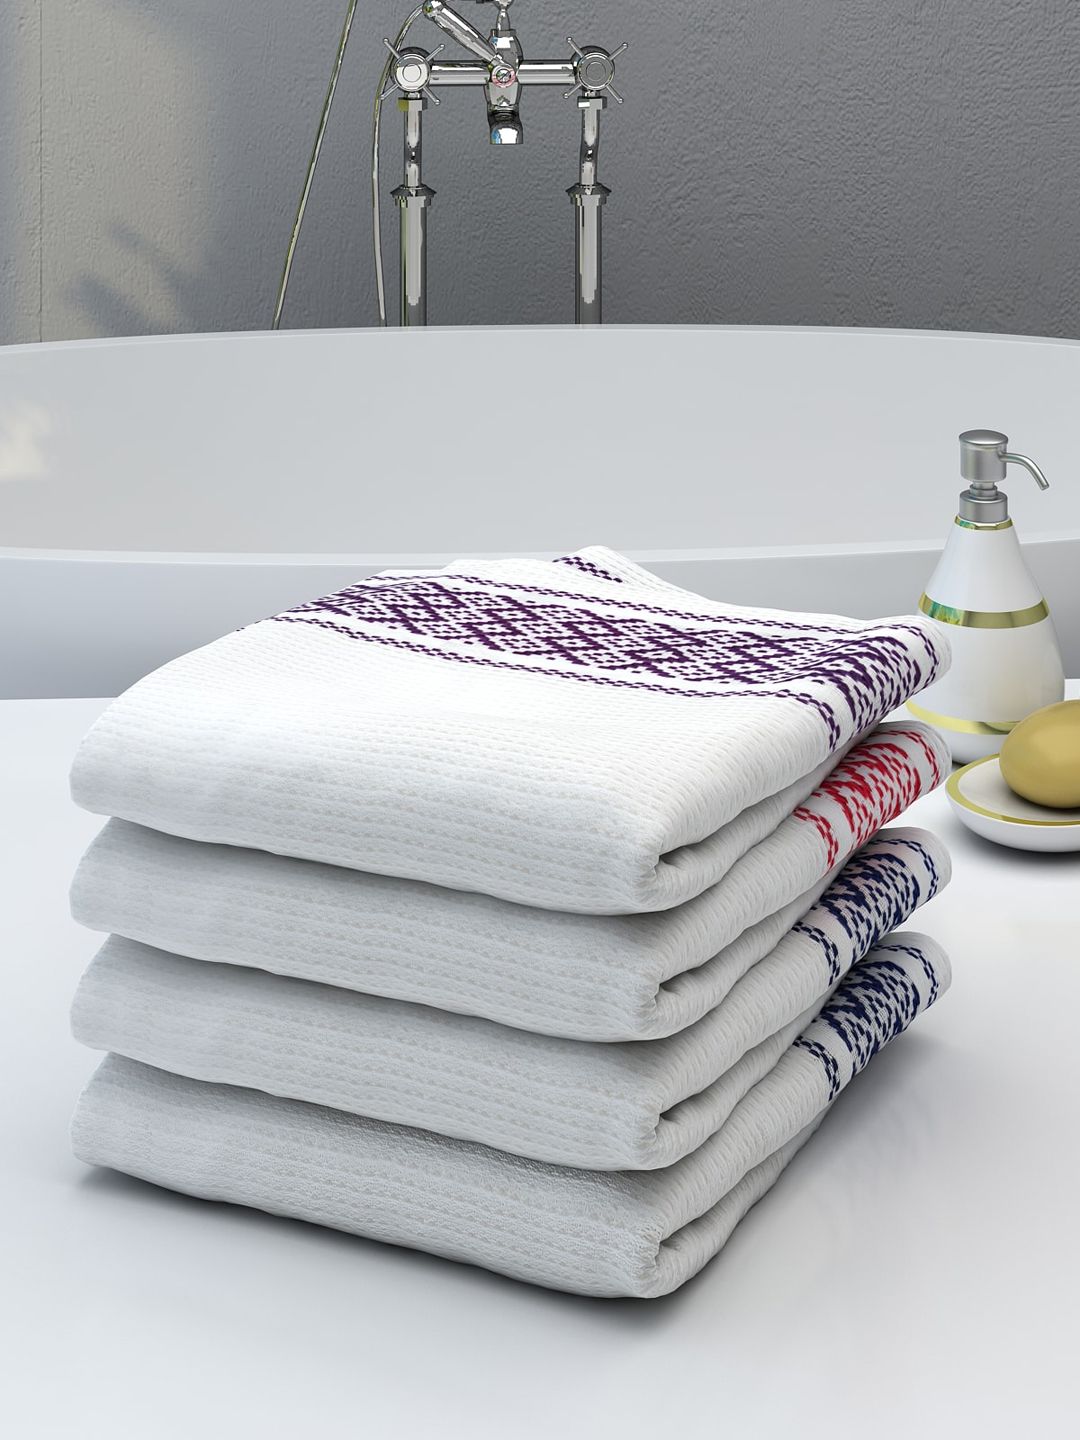 Athom Trendz Pack Of 4 White Striped 210 GSM Bath Towels Price in India